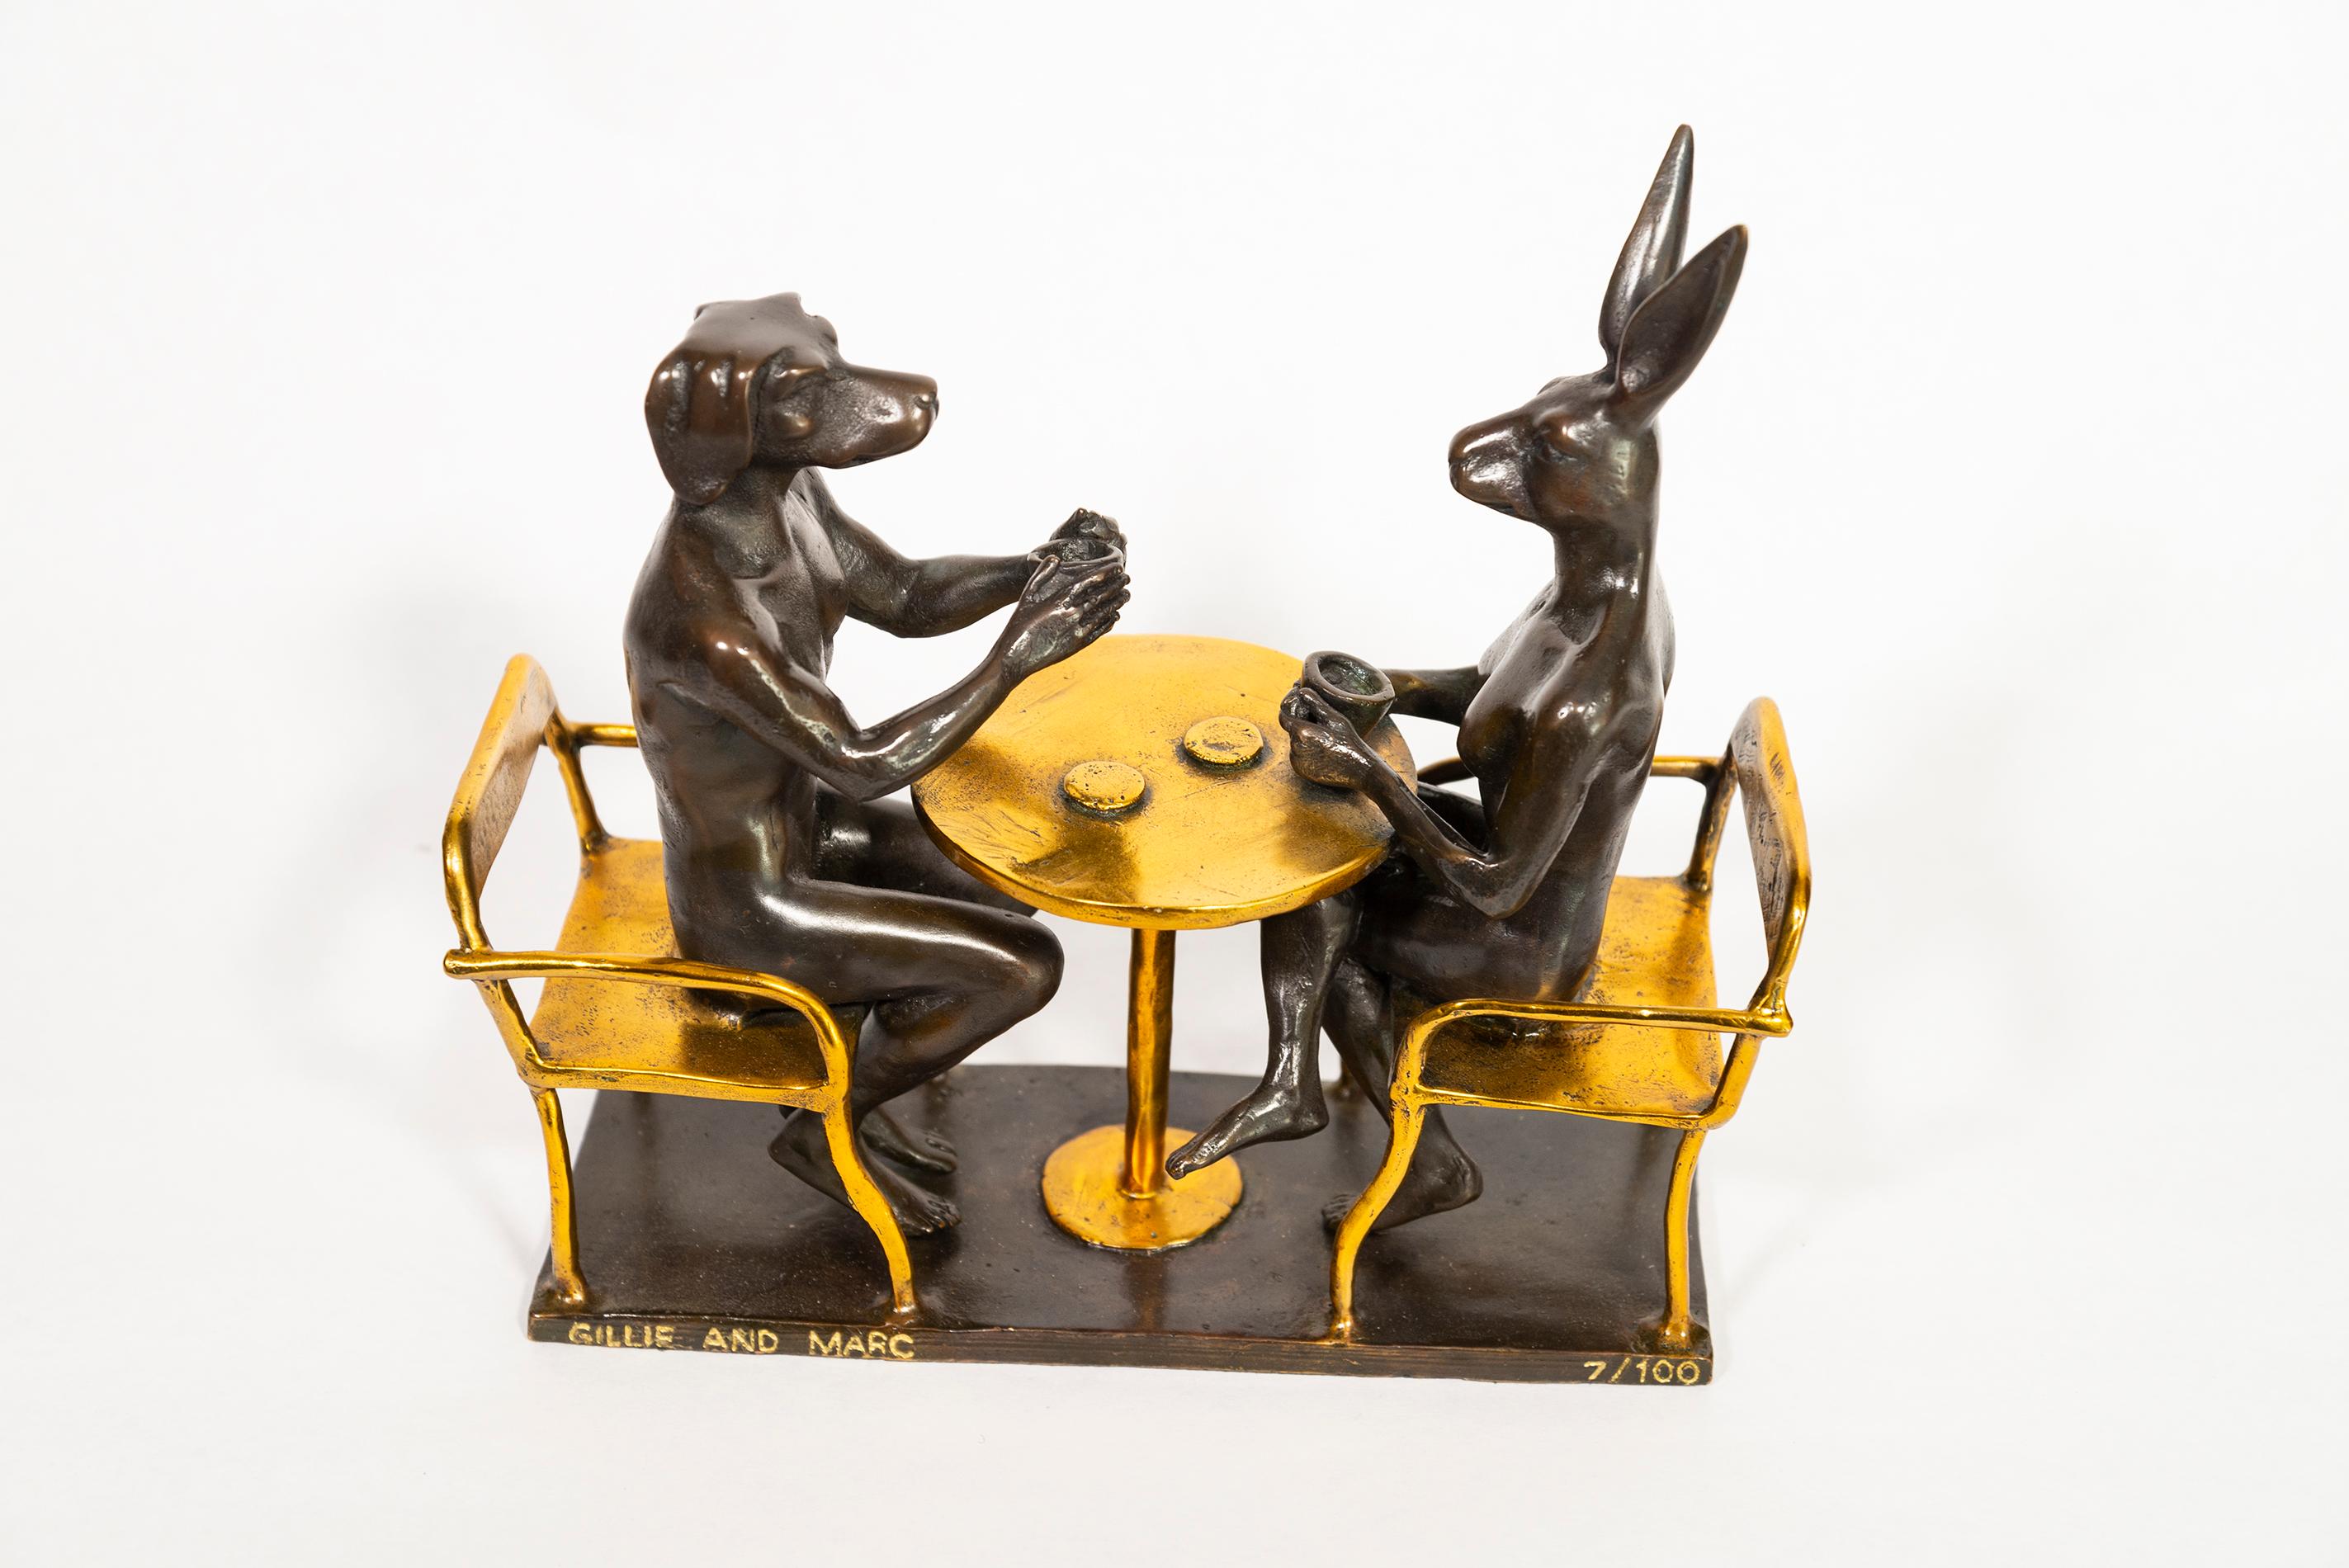 They drank coffee all day and all night 7/100 - figurative, bronze sculpture - Sculpture by Gillie and Marc Schattner